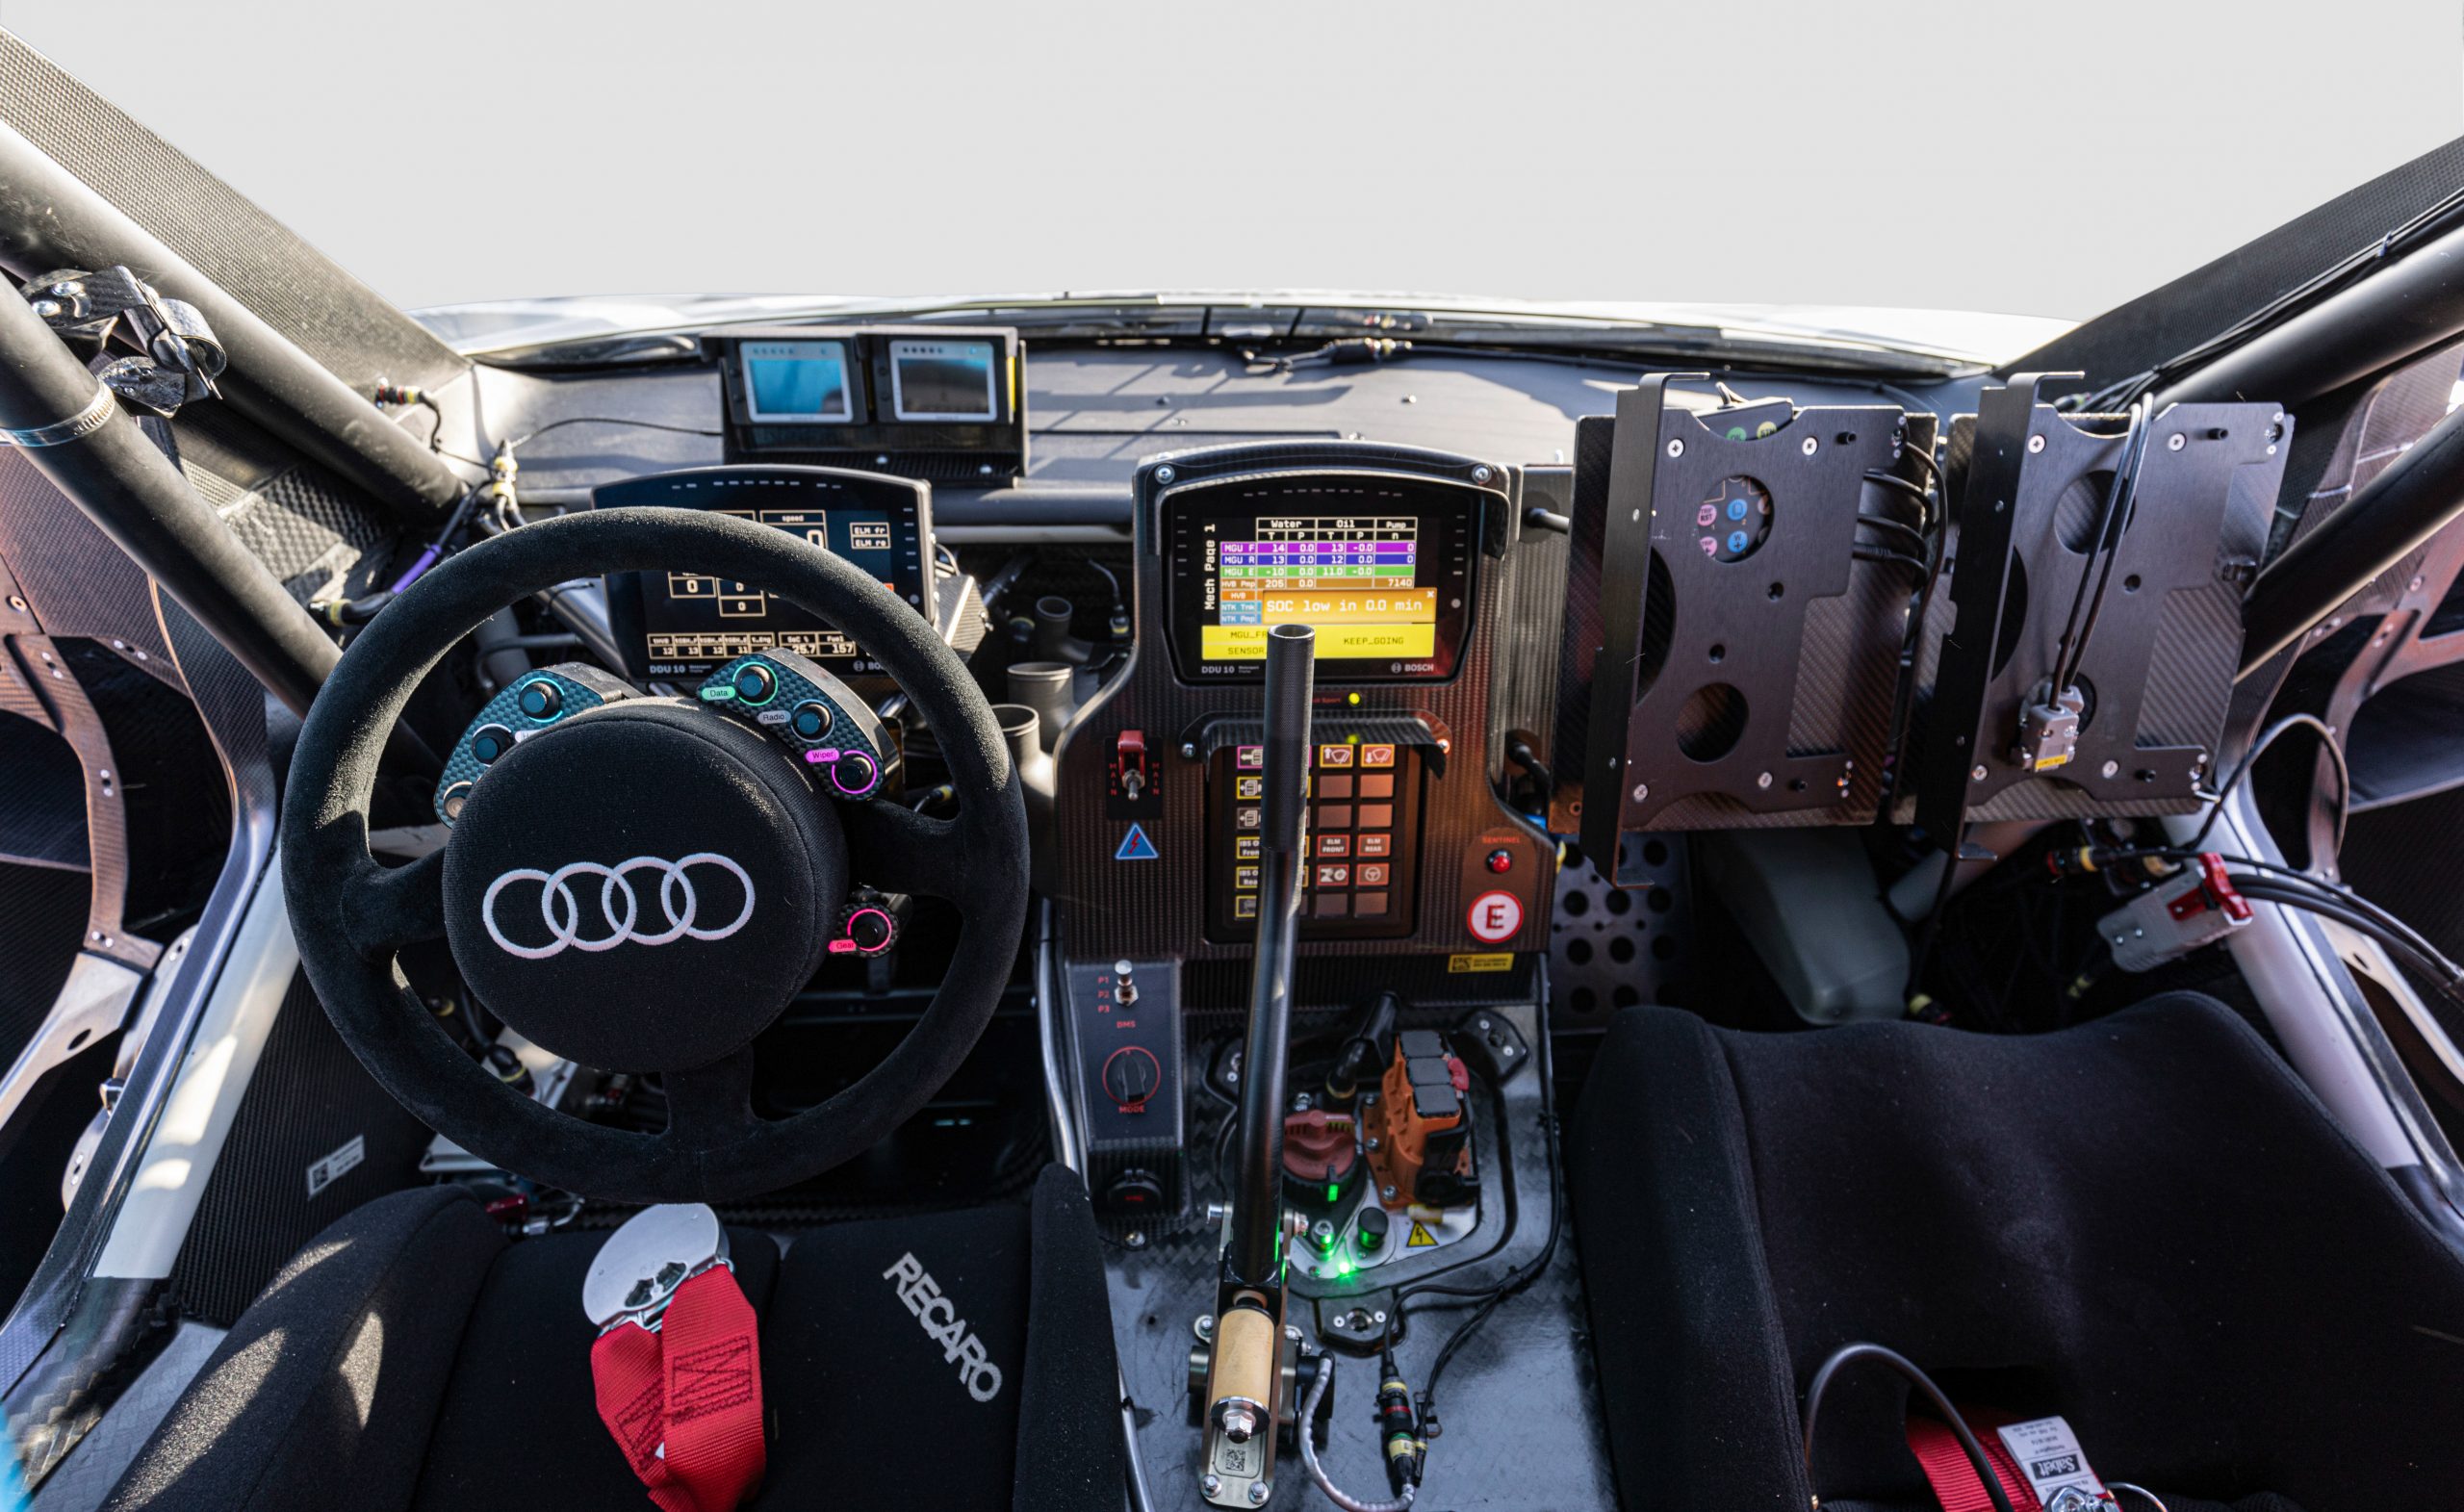 The Audi RS Q e-tron during testing in Morocco for the Dakar Rally.